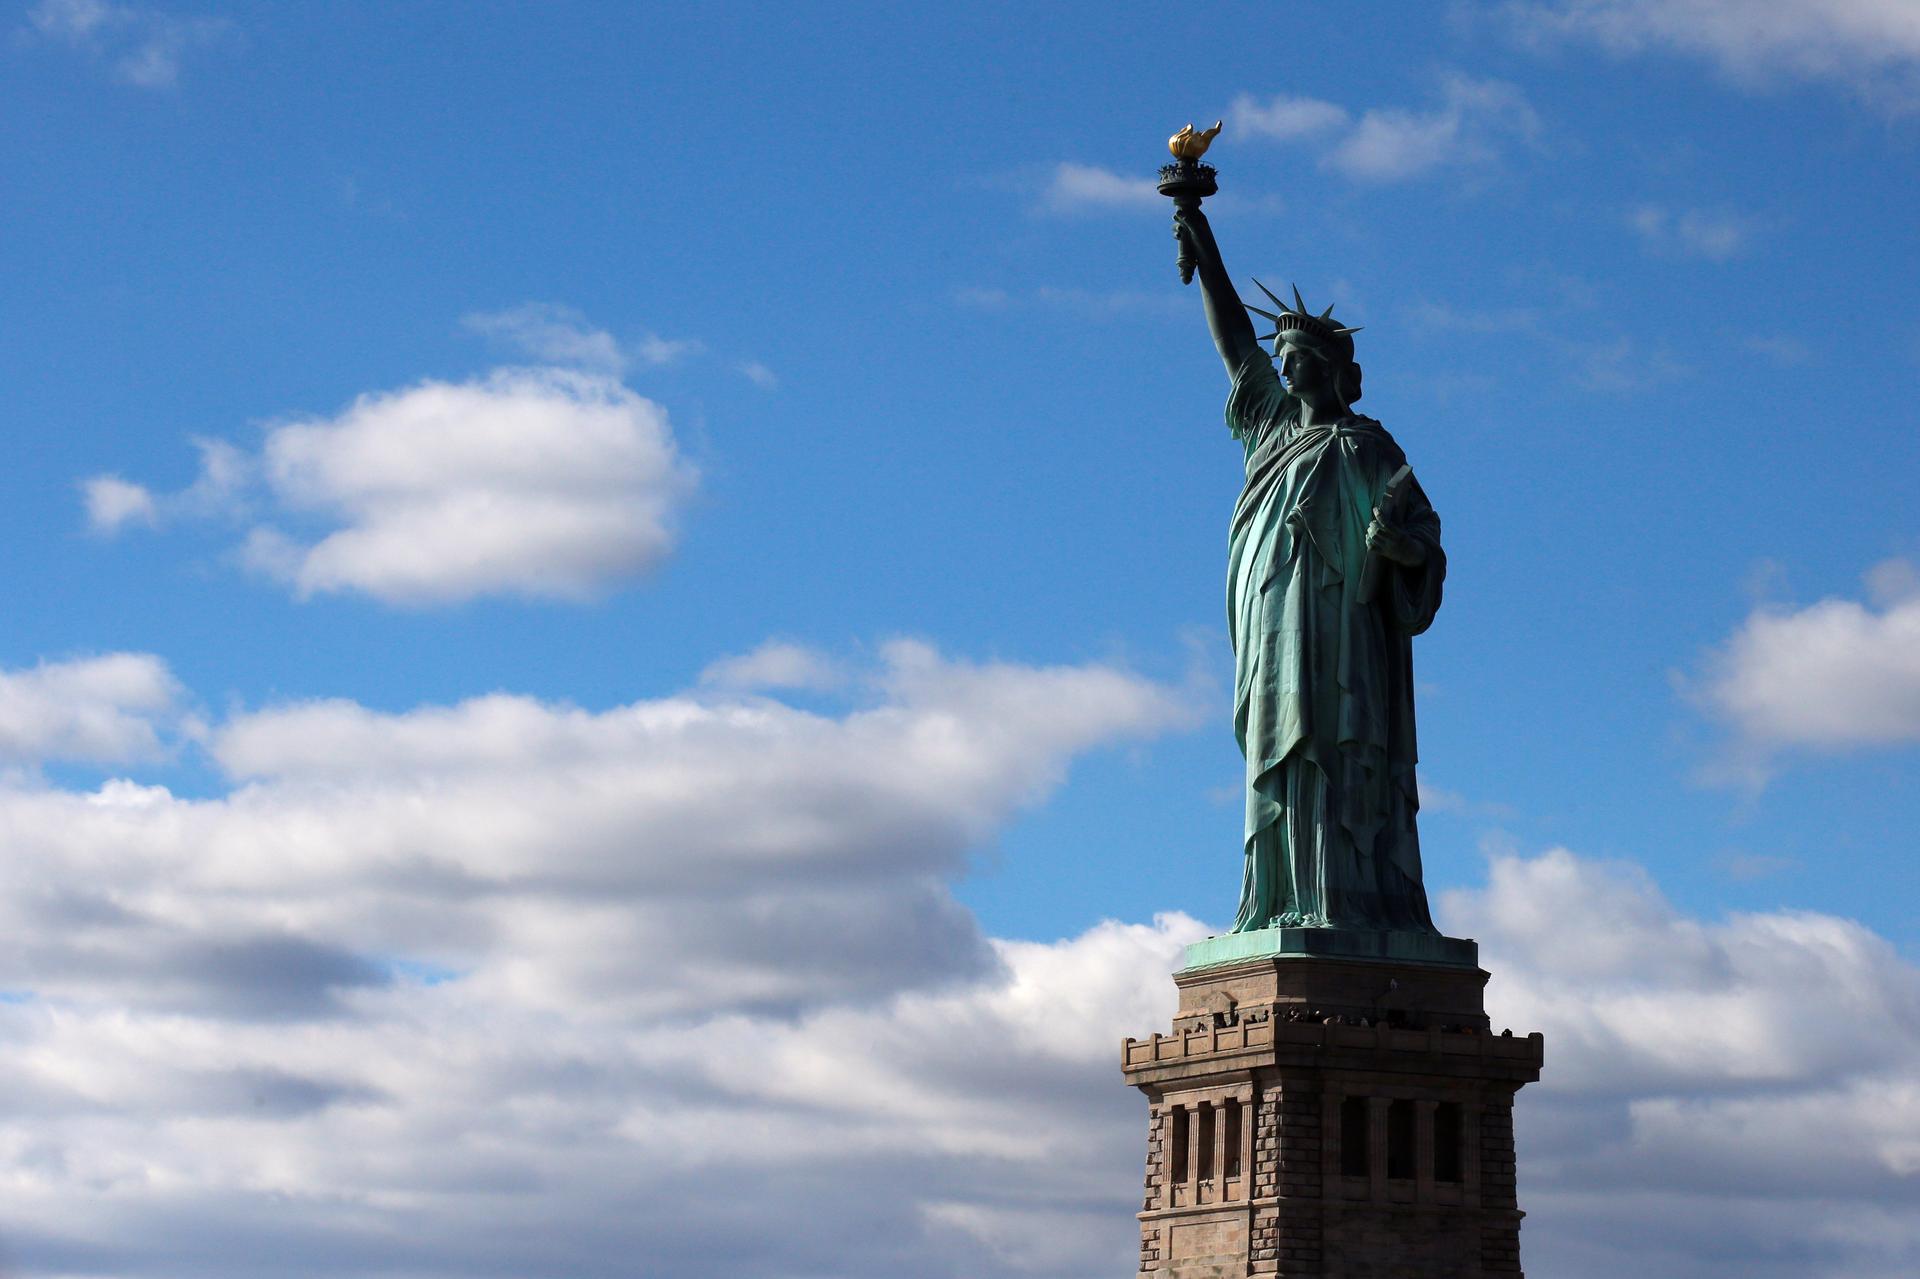 The Statue of Liberty is seen on the 130th anniversary of the dedication in New York Harbor, in New York City.